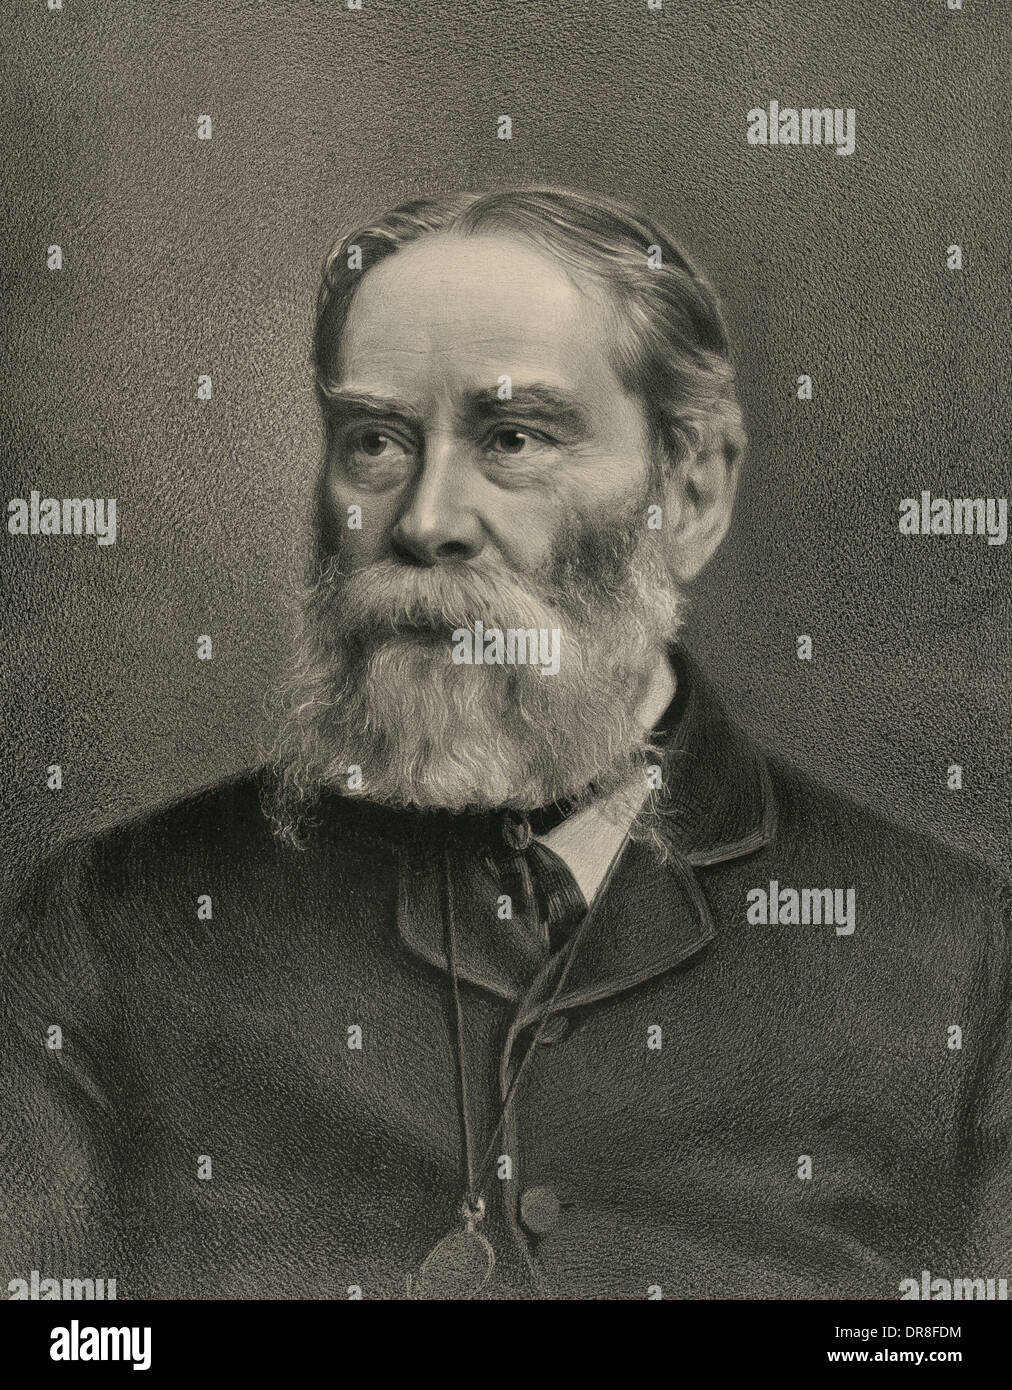 James Russell Lowell - American Poet, critic and diplomat, 1890 Stock Photo